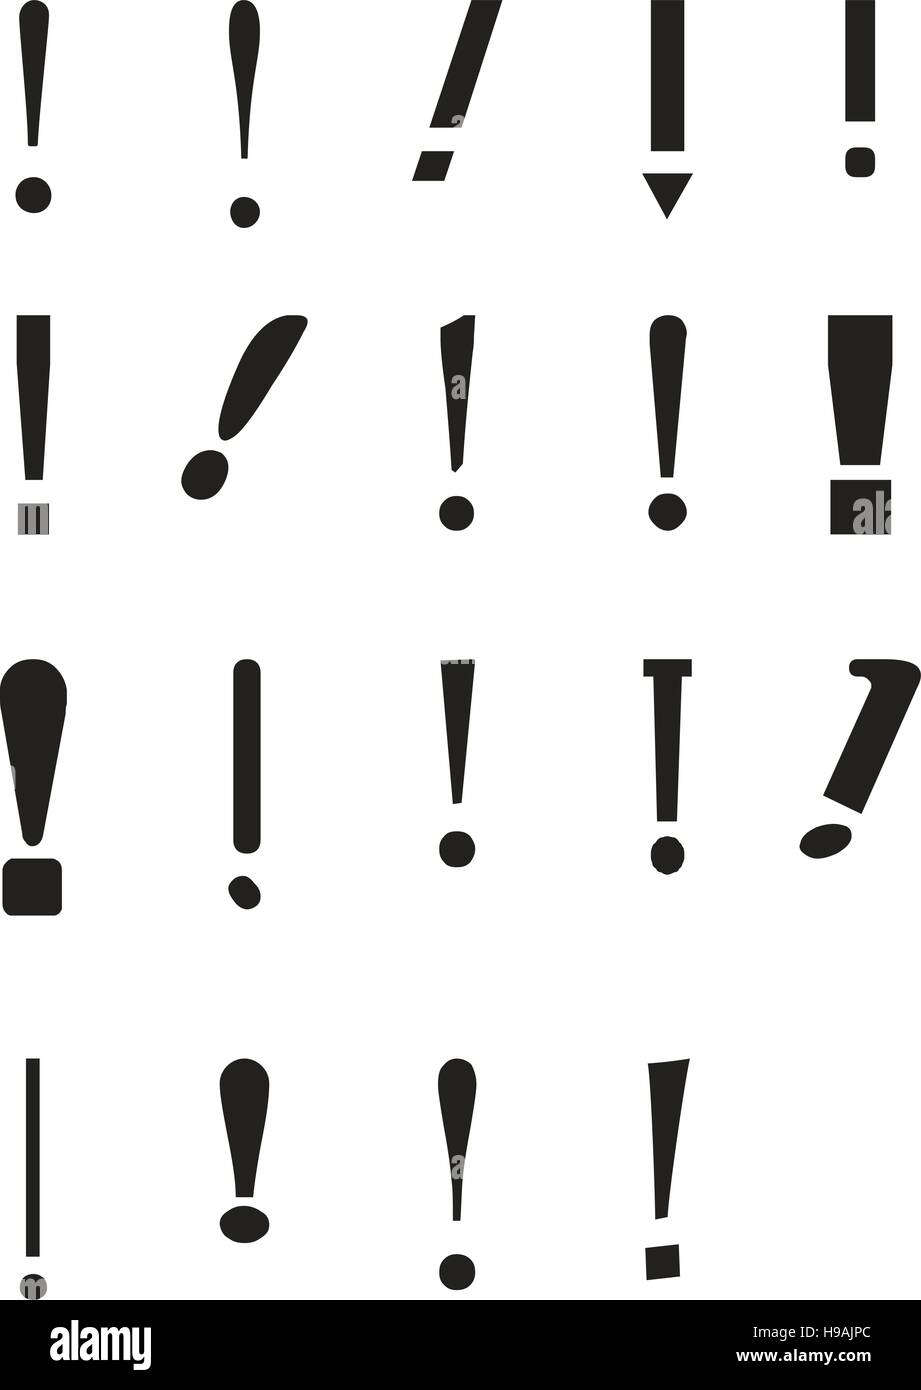 Exclamation Point Icon Set Stock Vector